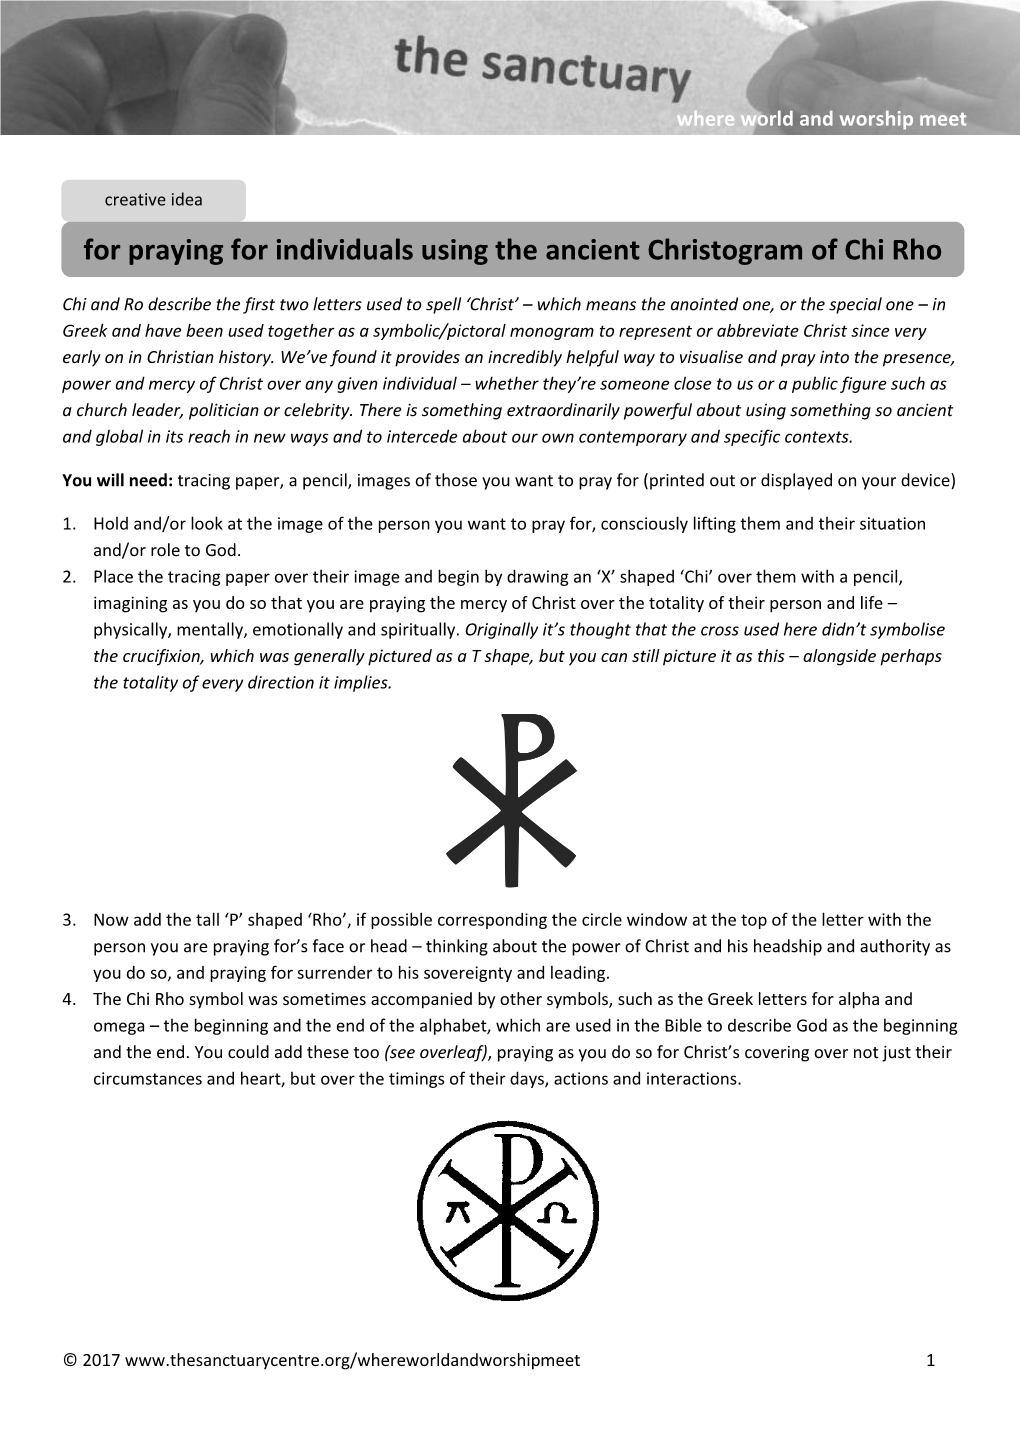 For Praying for Individuals Using the Ancient Christogram of Chi Rho